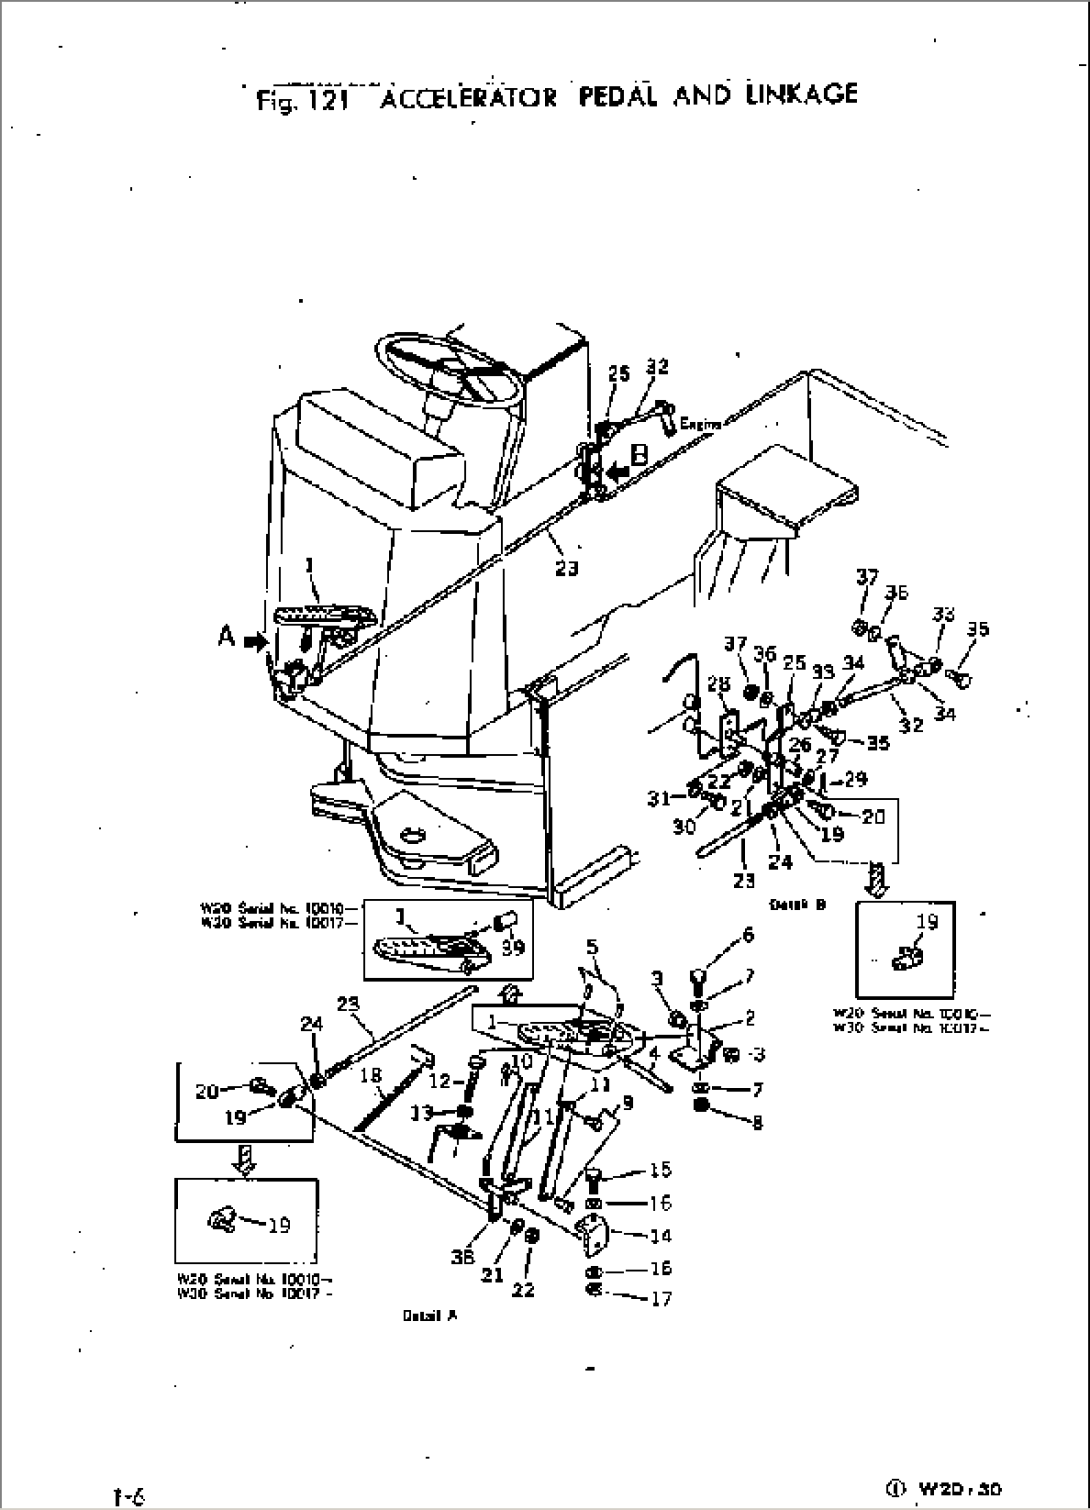 ACCELERATOR PEDAL AND LINKAGE